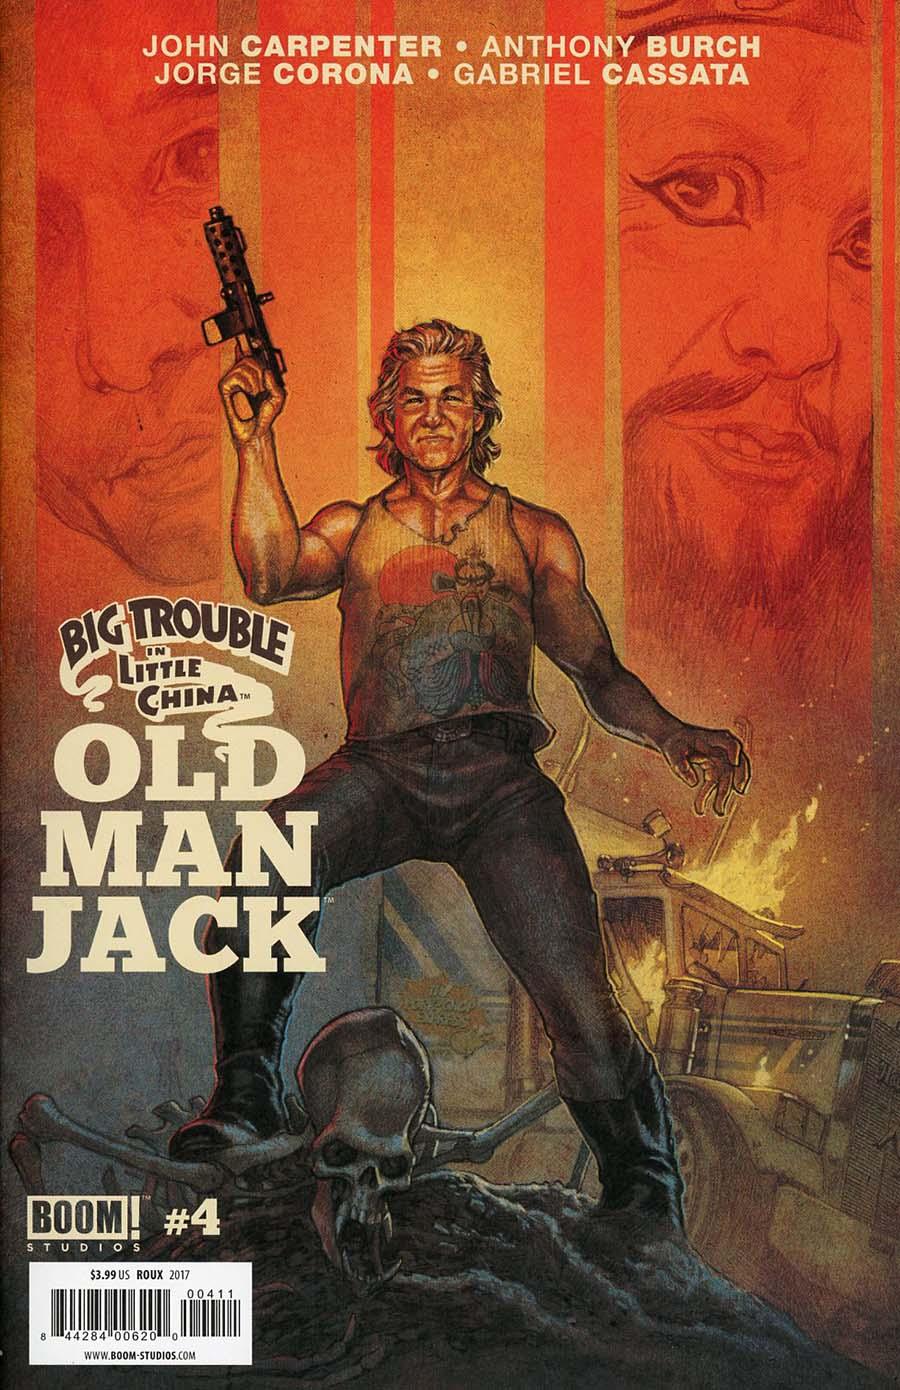 Big Trouble In Little China Old Man Jack Vol. 1 #4